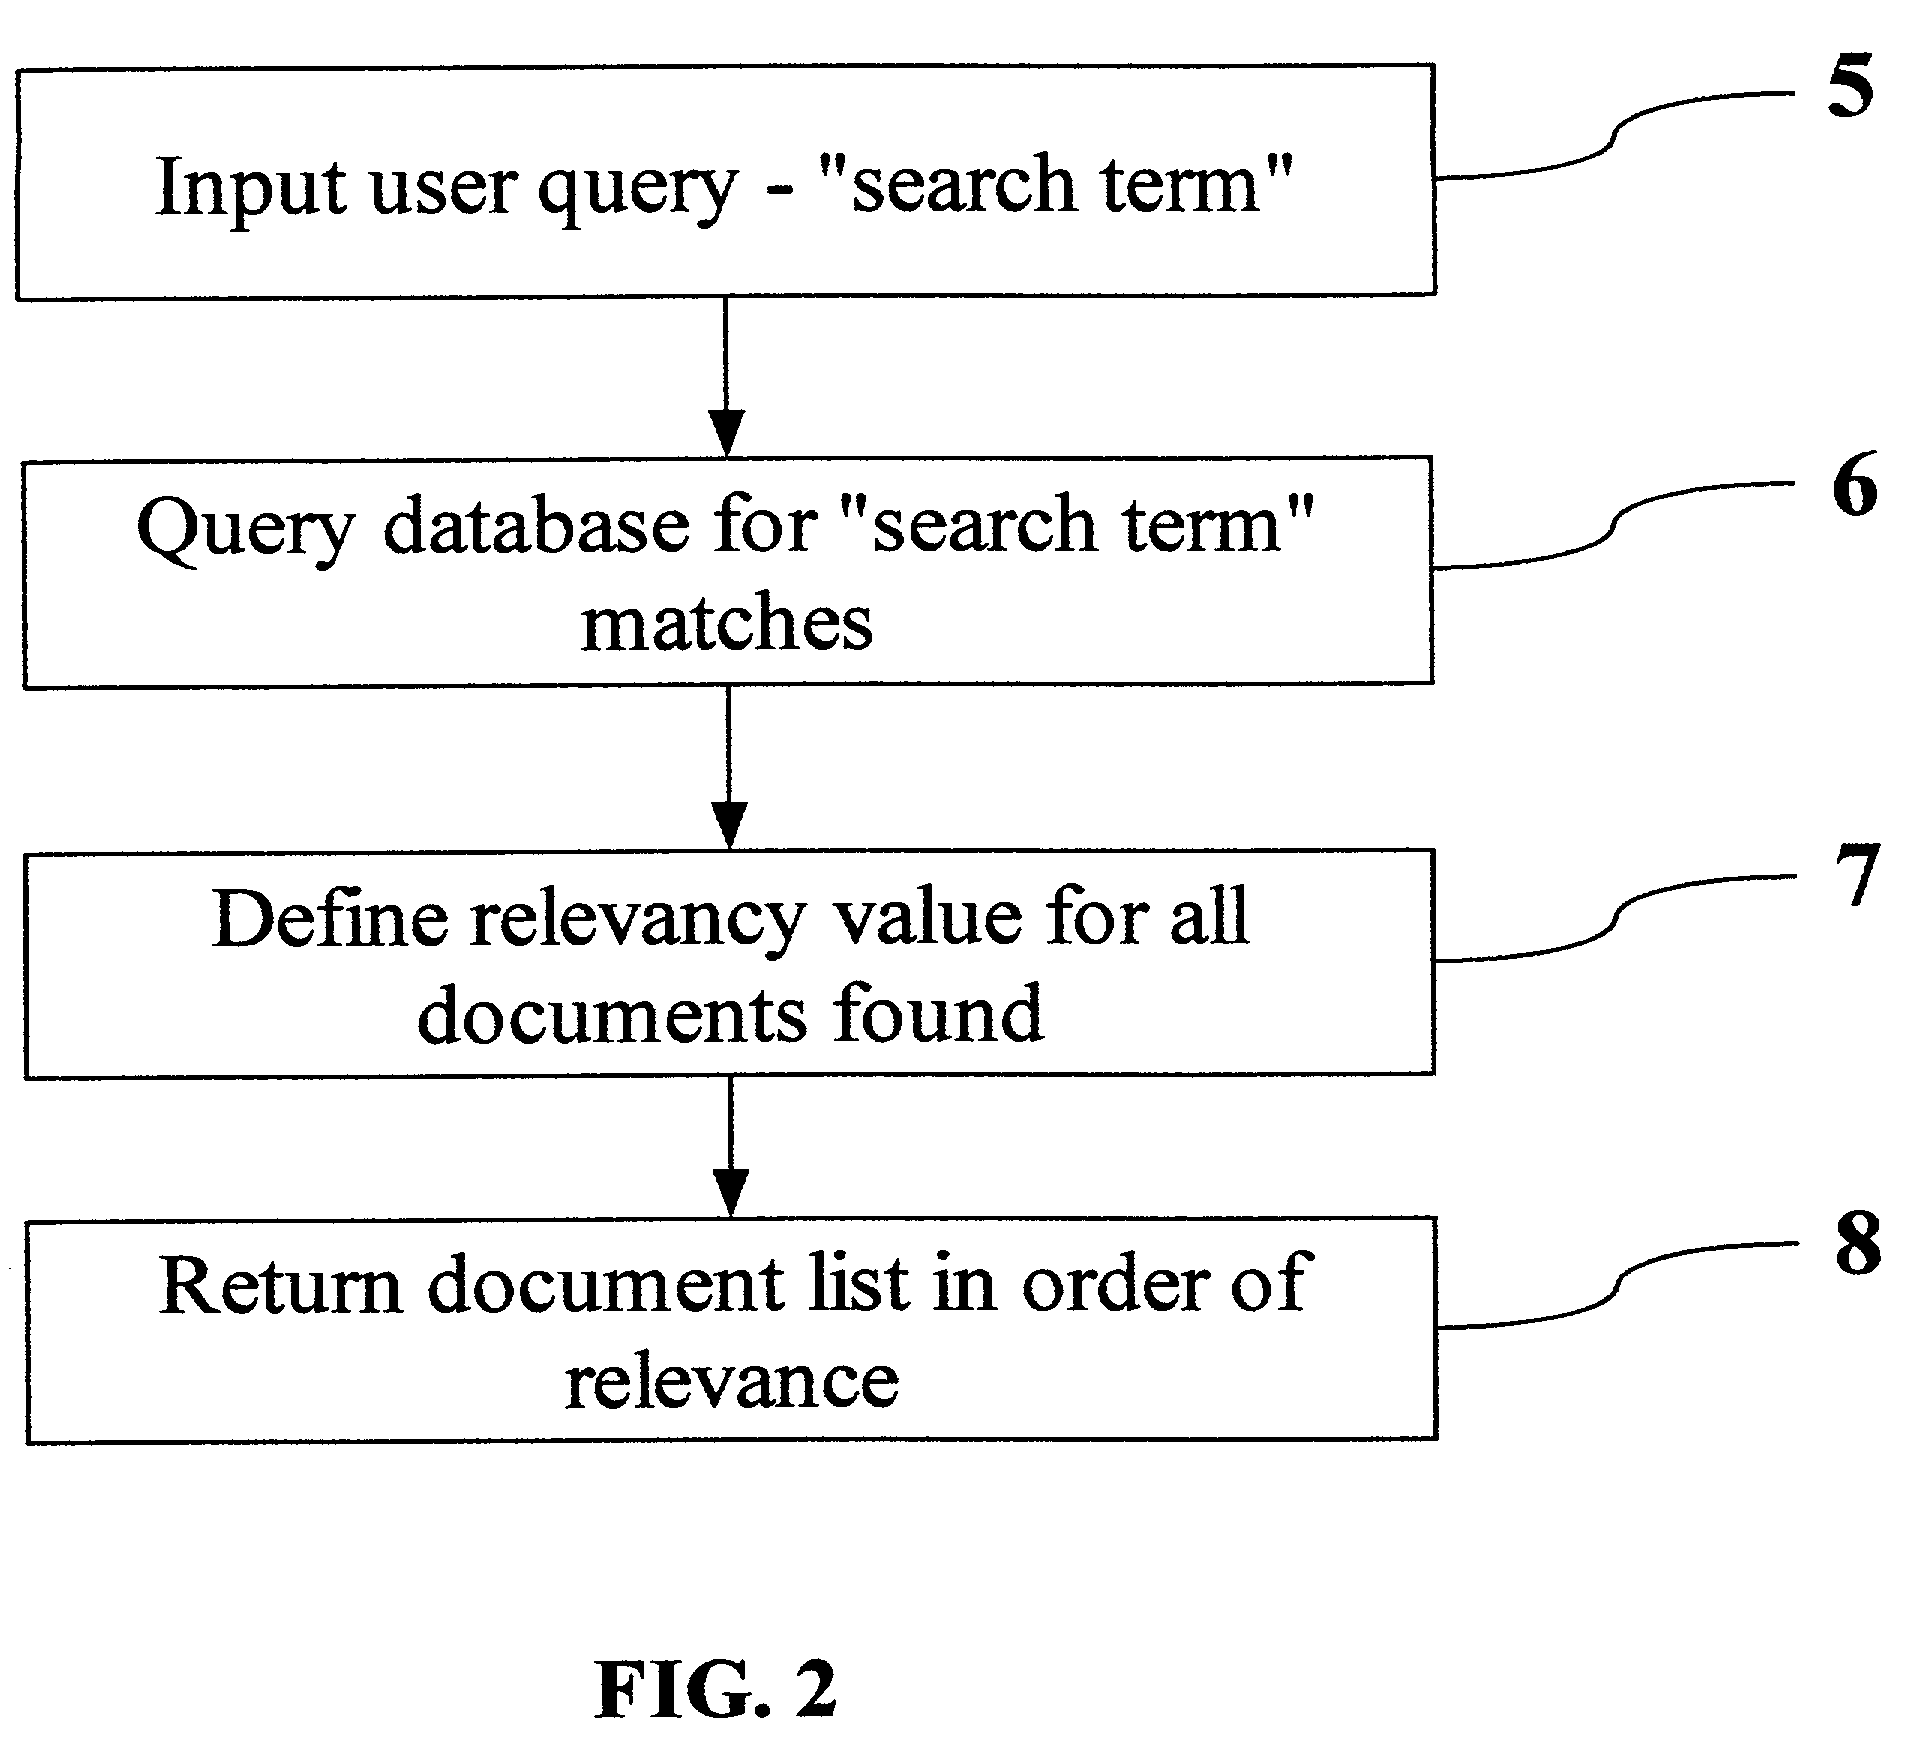 System and method for predicting additional search results of a computerized database search user based on an initial search query